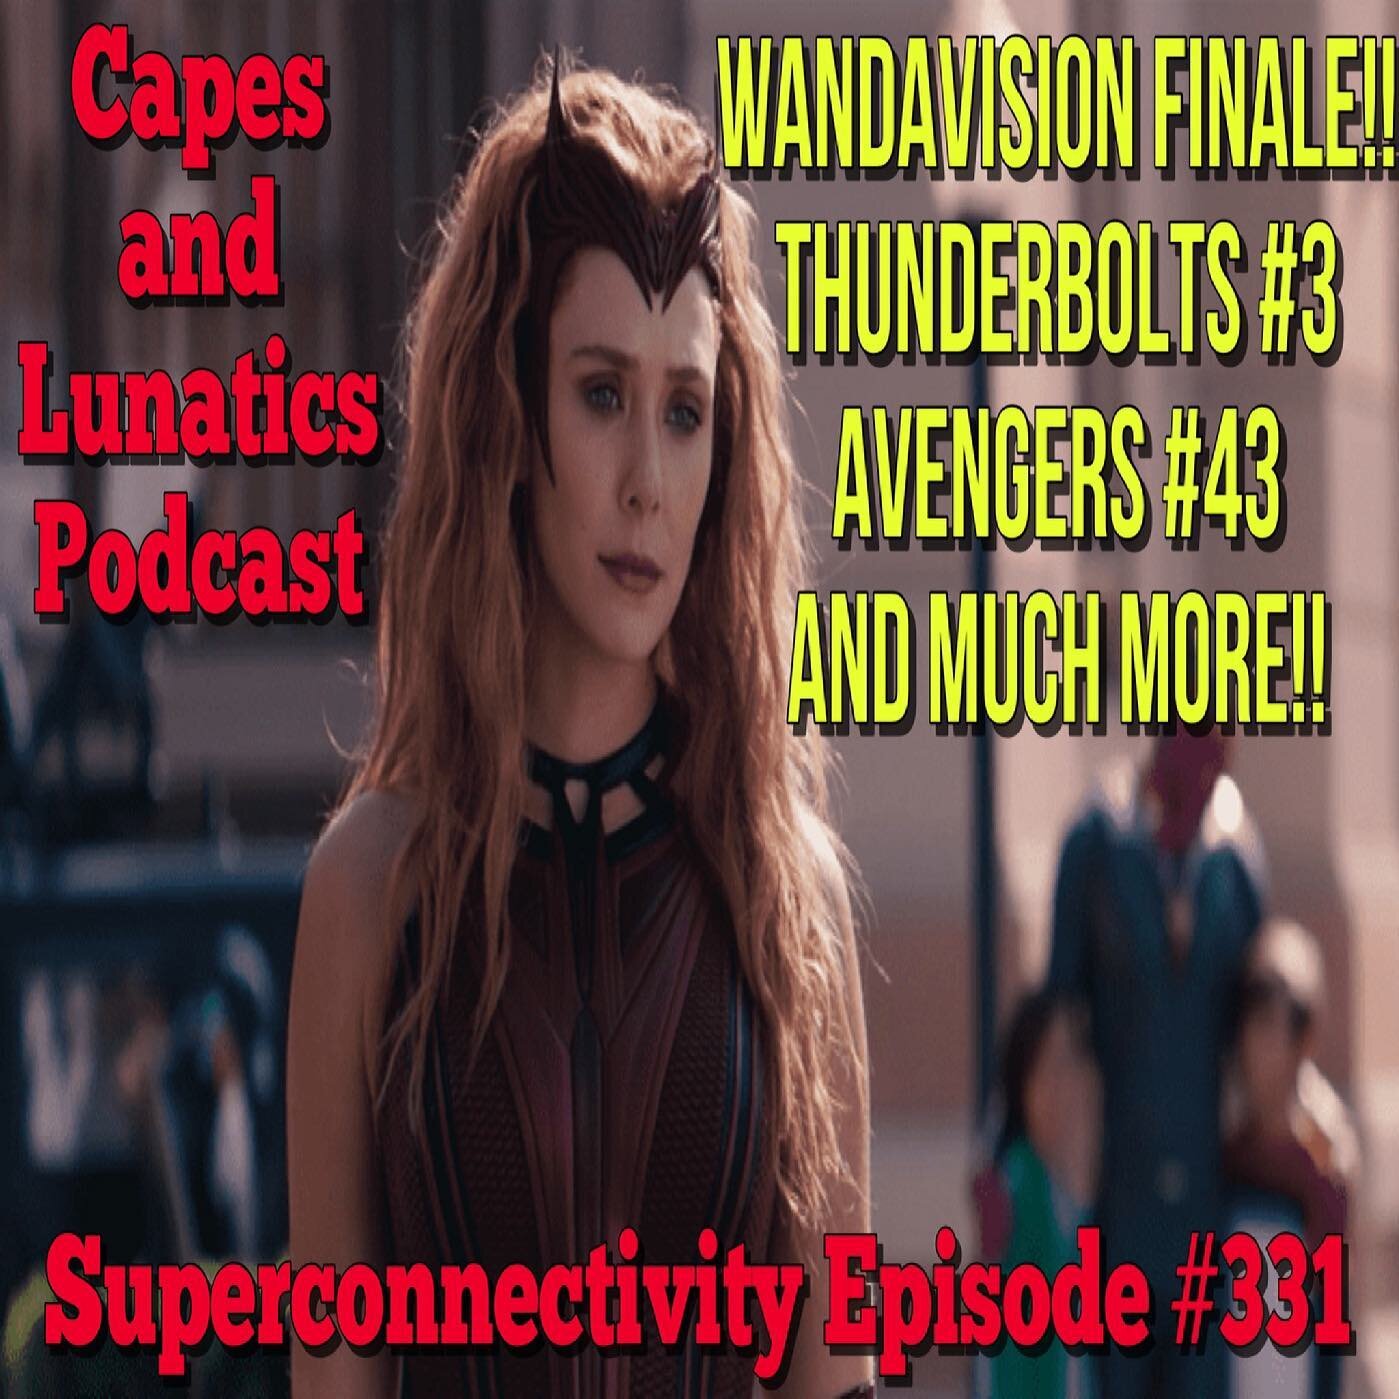 Superconnectivity #podcast episode #331! @superconnectivity and @nightwingpdp discuss #wandavision and new Comics including #thunderbolts #avengers #kinginblack #captainamerica #msmarvel and much MORE! Check it out on our #youtubechannel or anywhere 